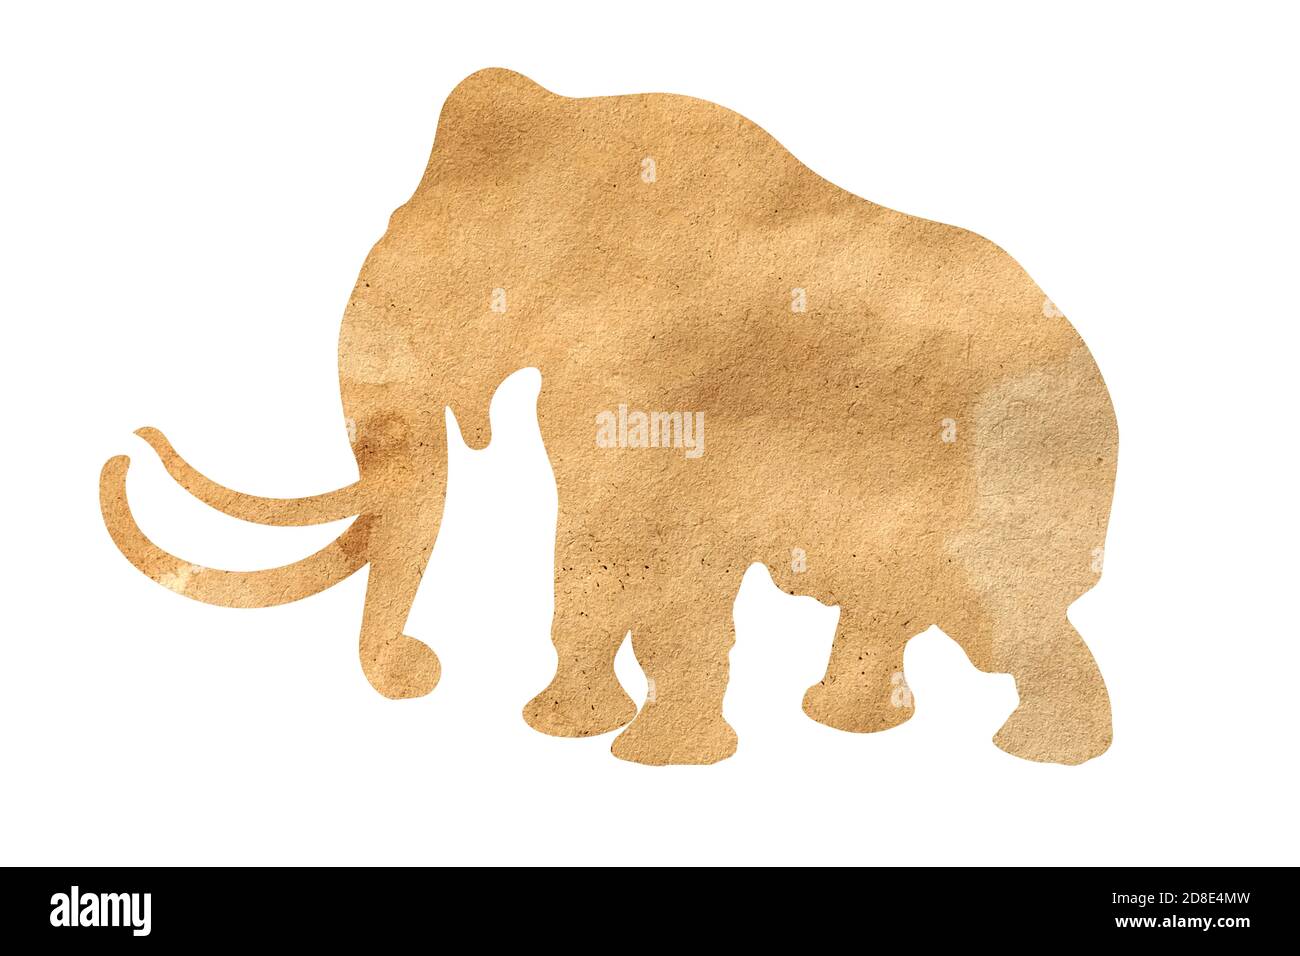 silhouette of an elephant from wrapping paper isolated on white background Stock Photo